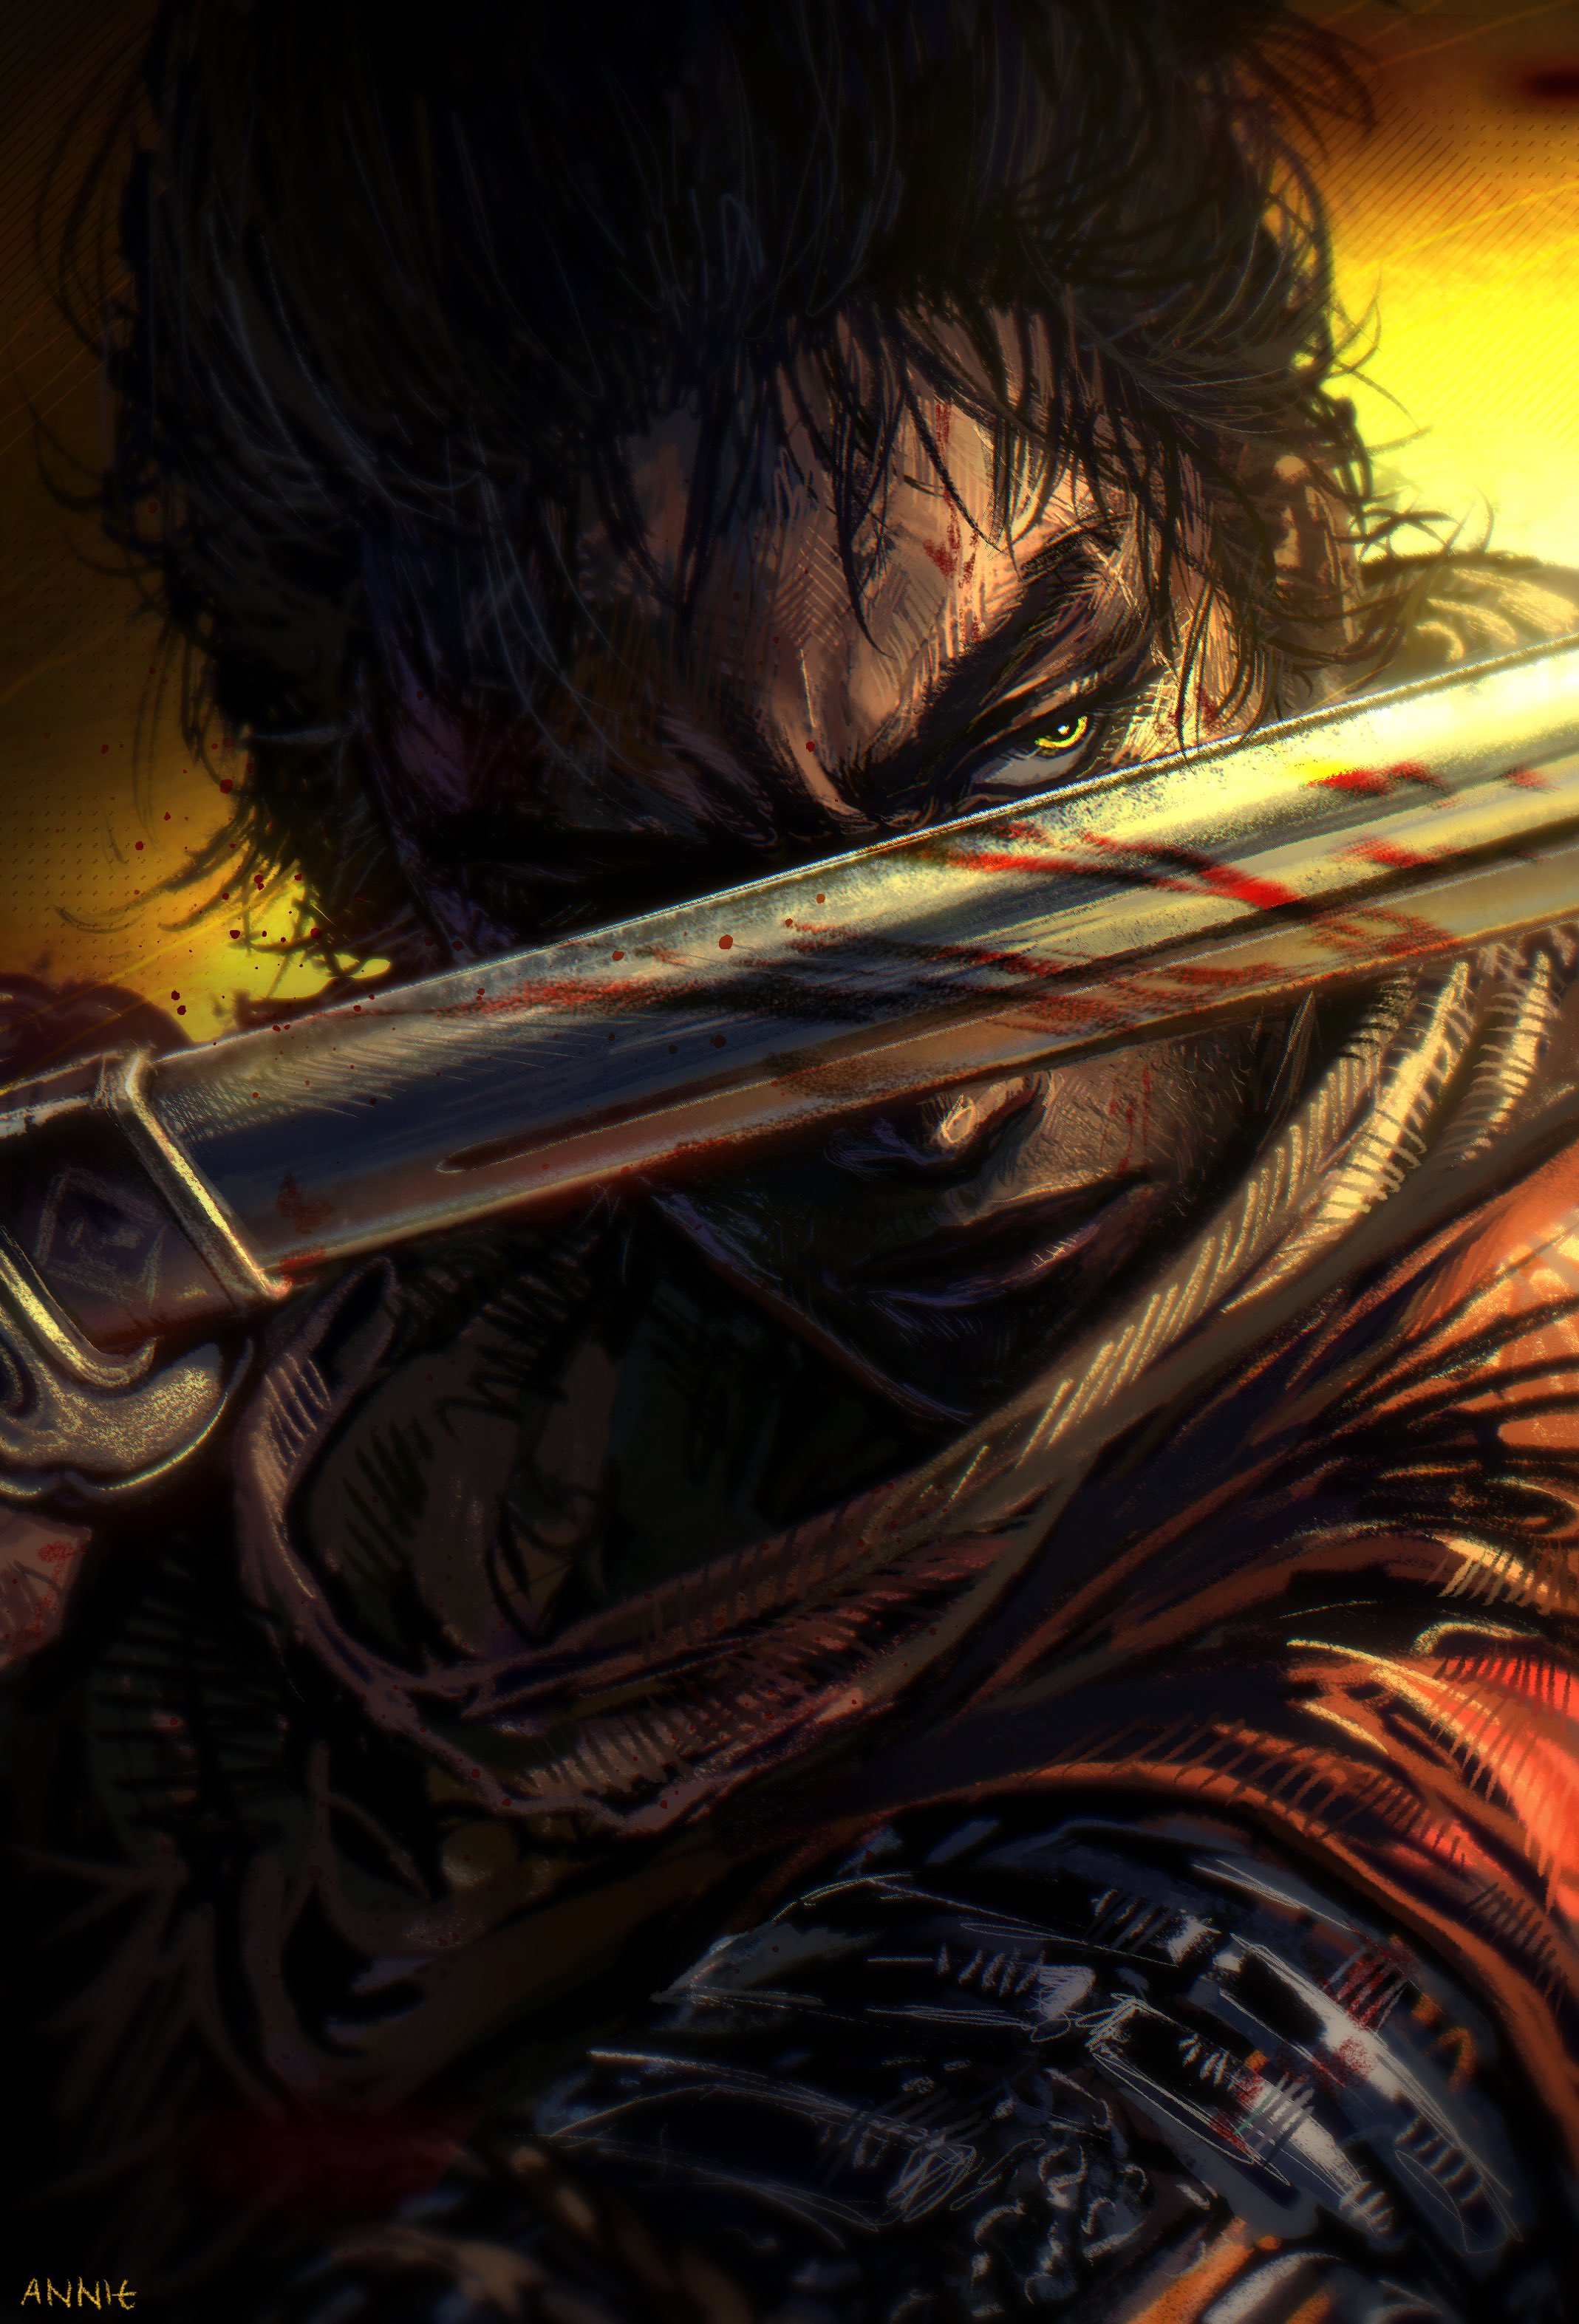 General 2137x3146 fantasy art digital art artwork video game art Sekiro: Shadows Die Twice sword men with swords one eye obstructed blood signature Annie (Artist) video games looking away closed mouth black hair weapon